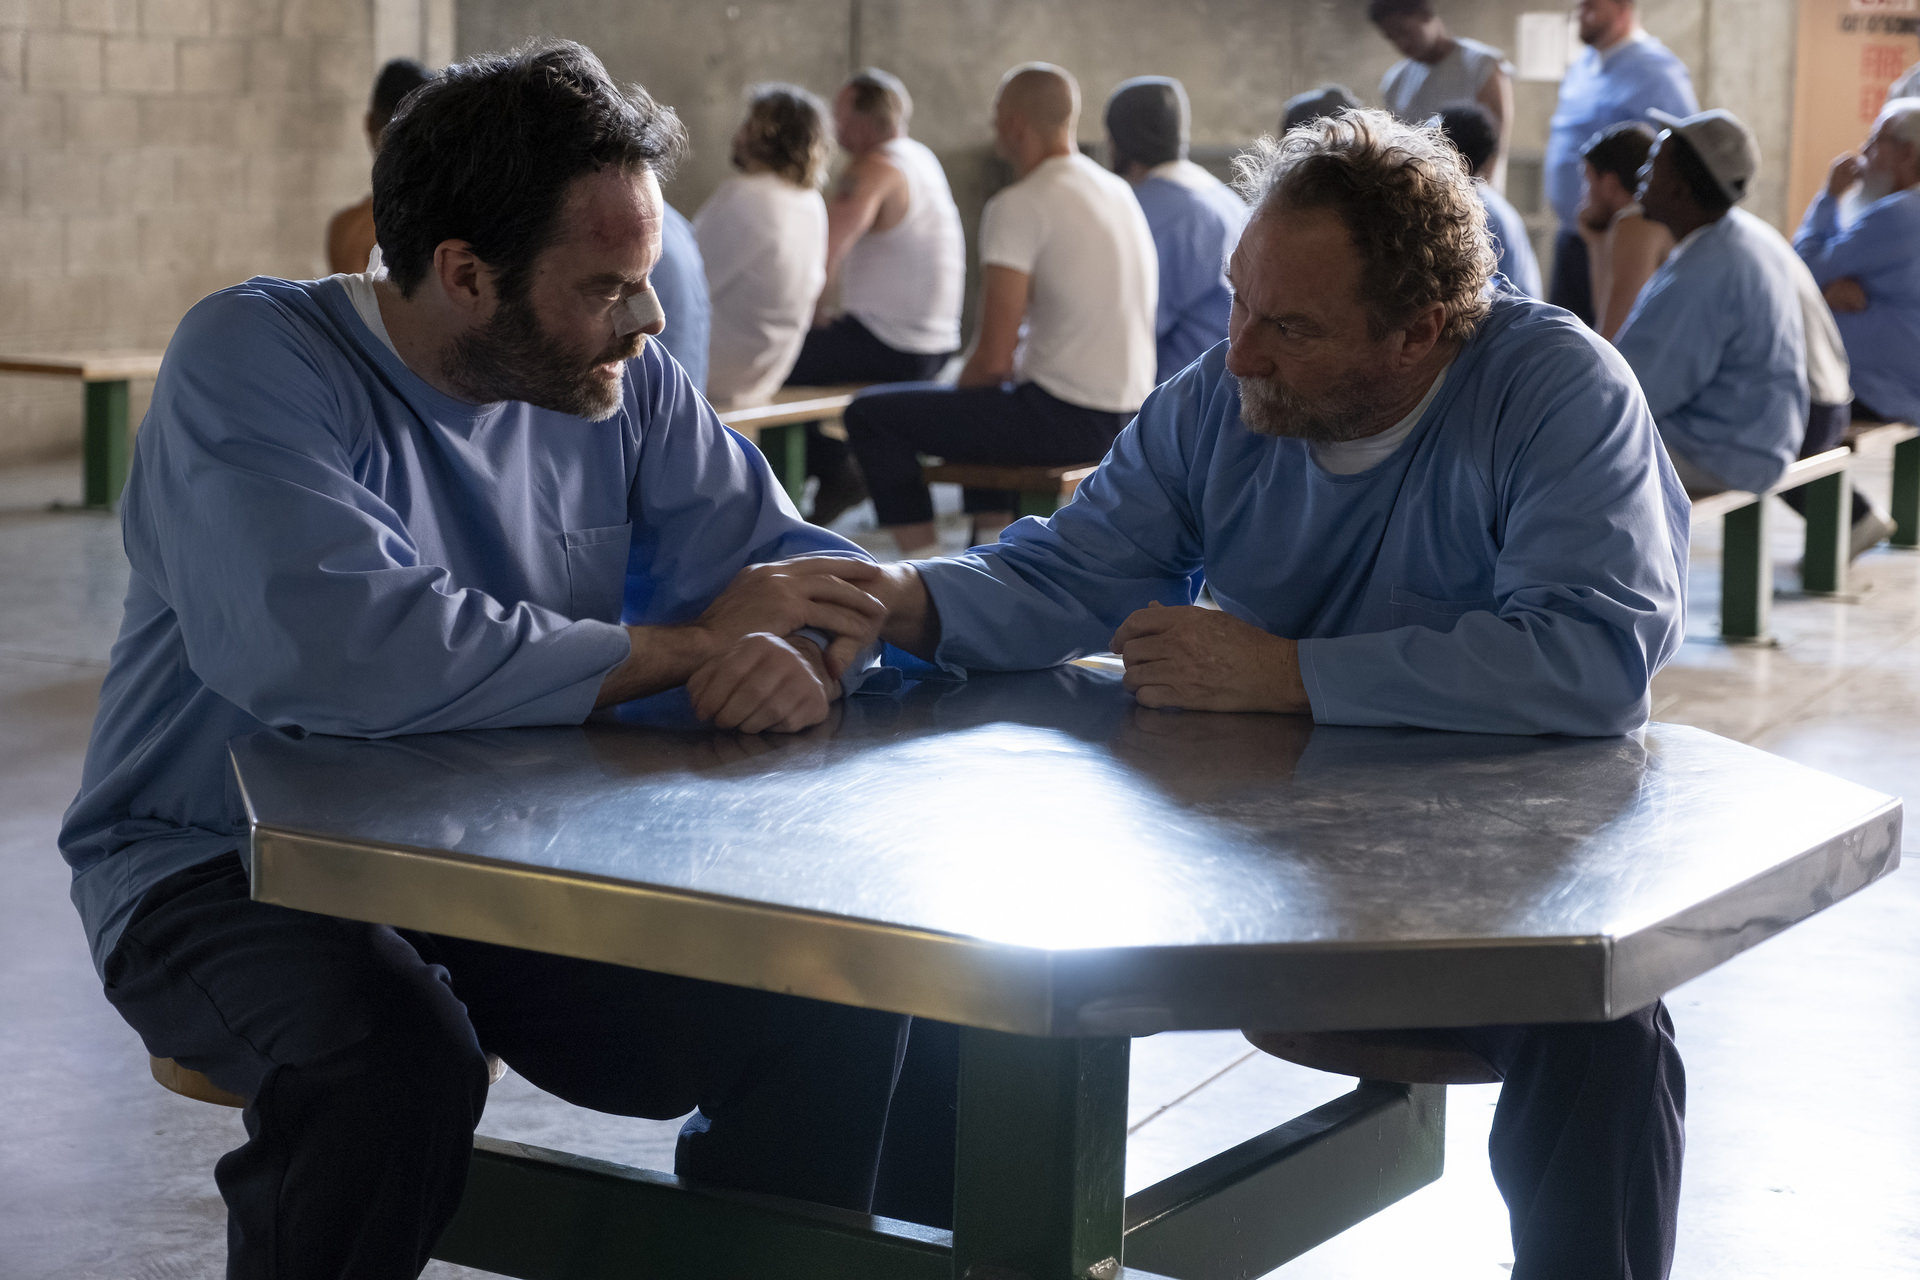 Bill Hader as Barry Berkman and Stephen Root as Monroe Fuches. Barry Season 4 Episode 2 Recap “bestest place on the earth”. Photograph by Merrick Morton/HBO